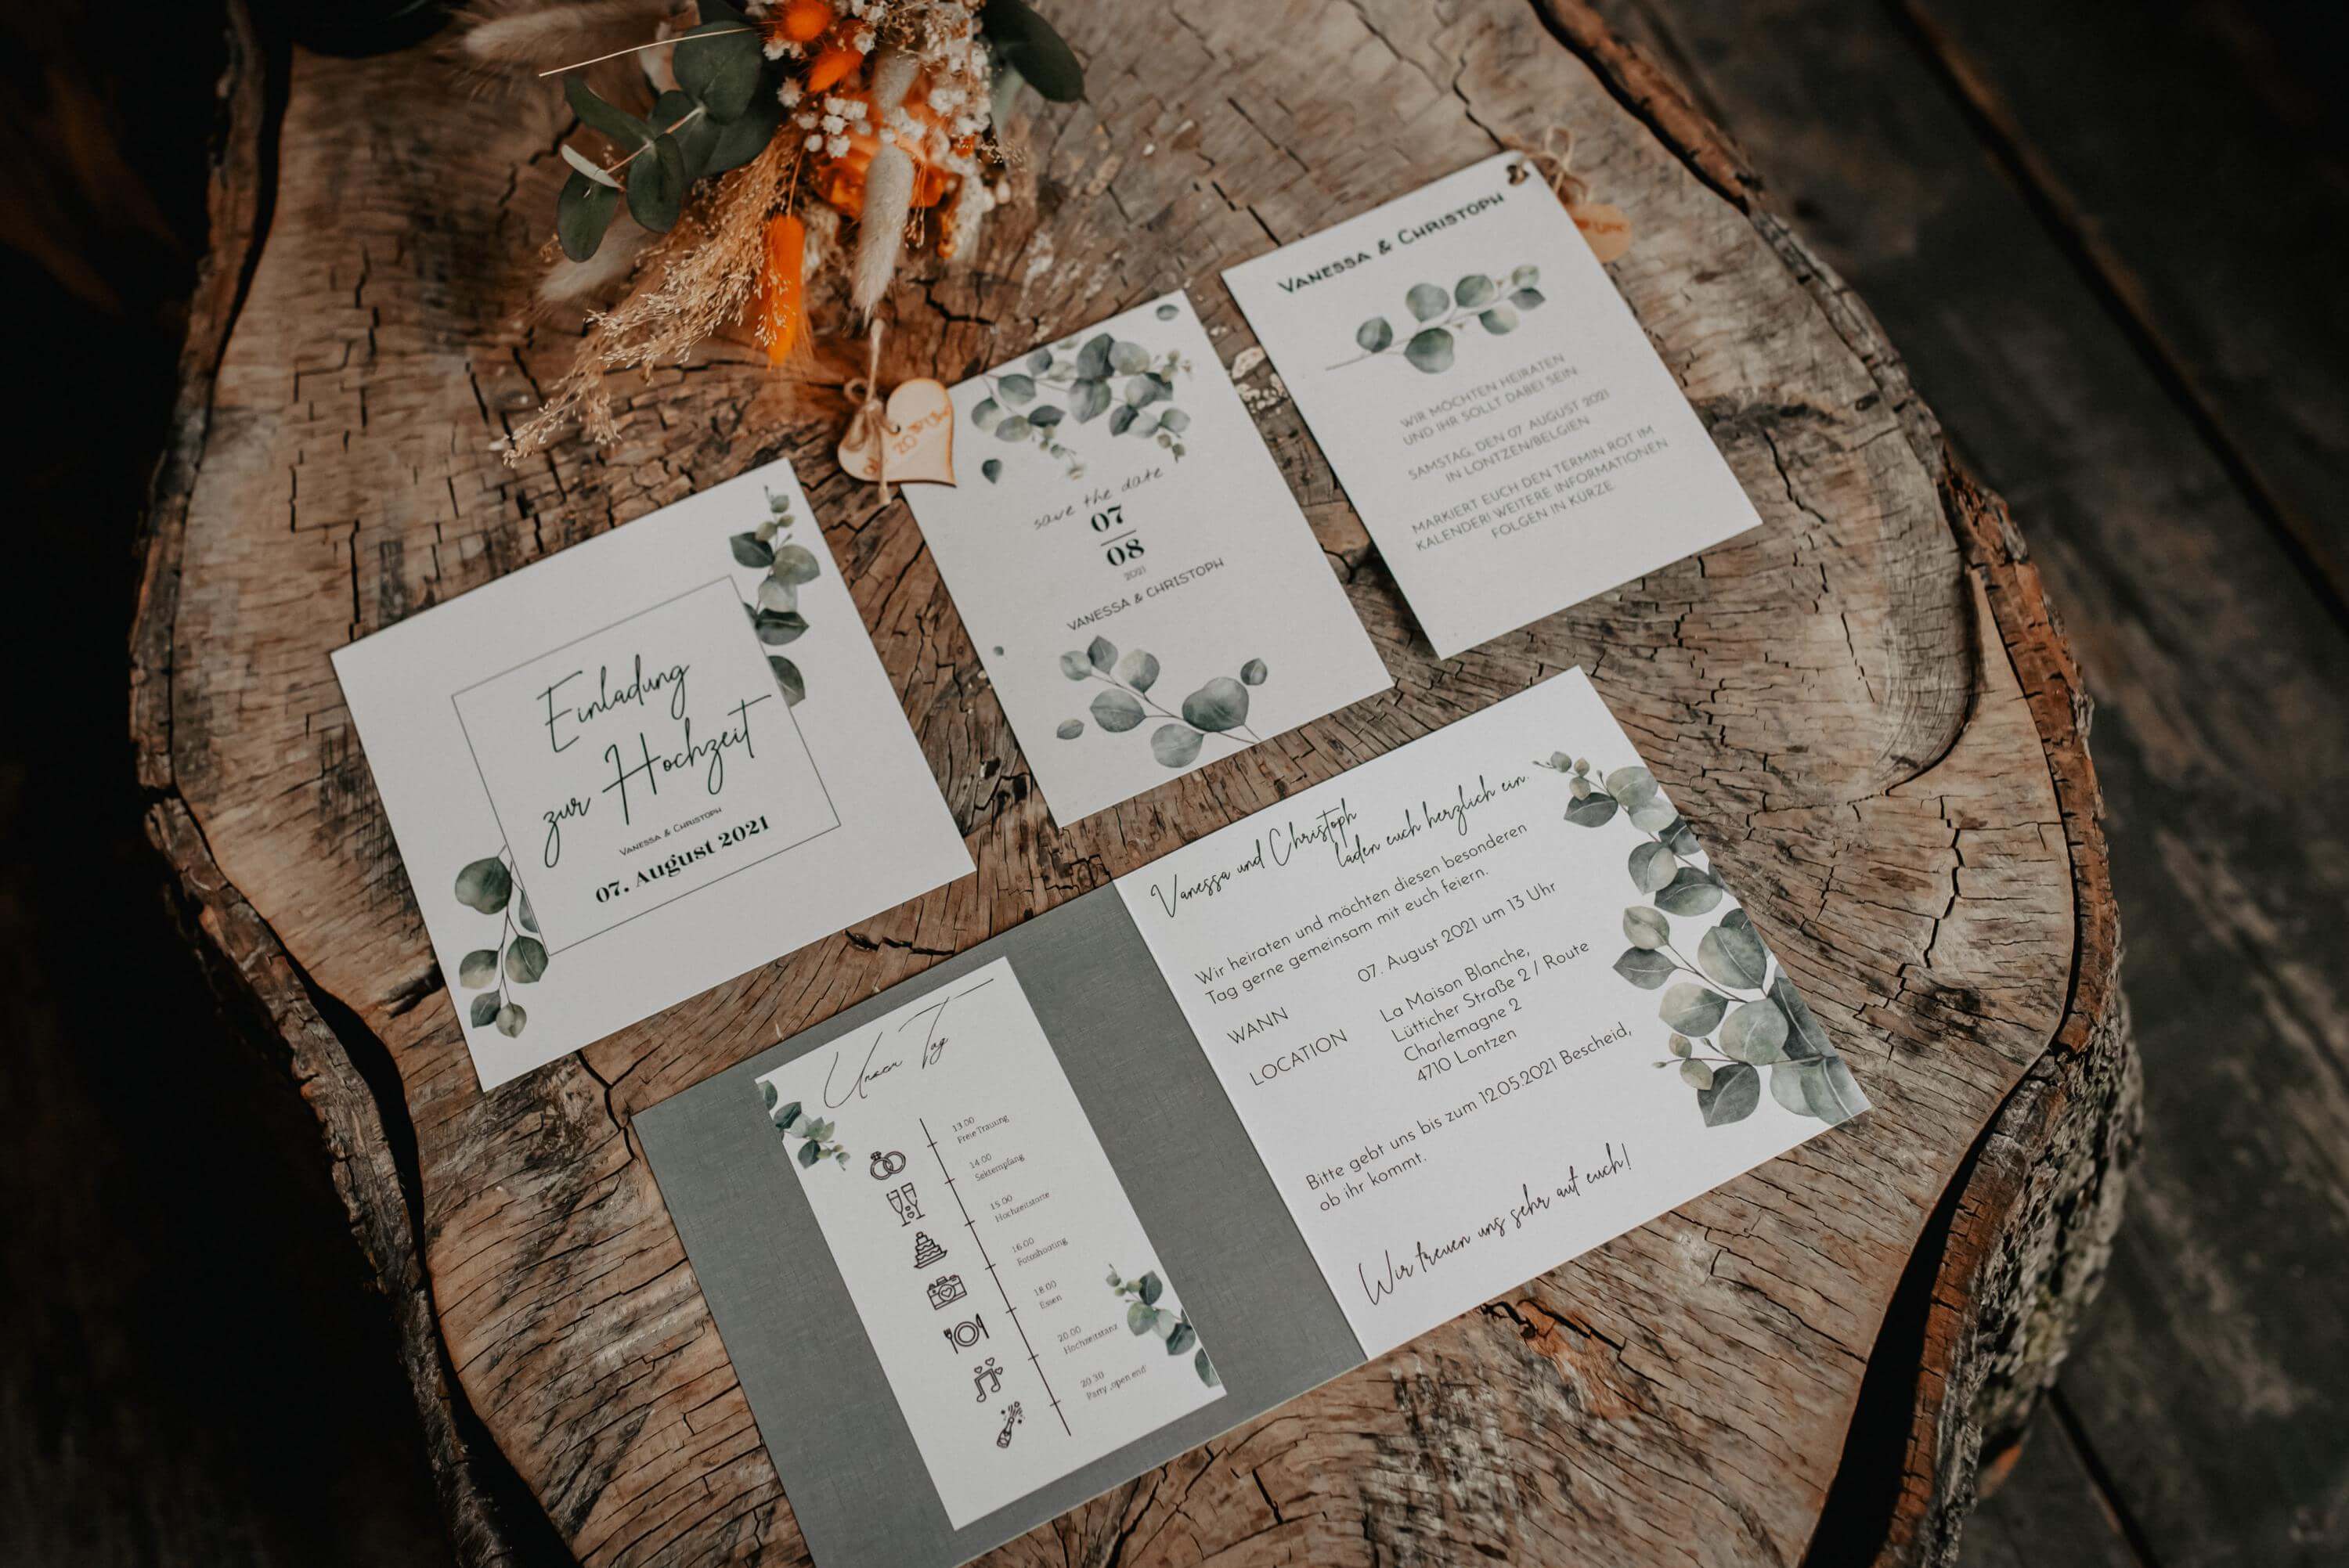 All the stationery for a wedding in a eucalyptus-colored design with 'Save the Date', invitation, menu and schedule is spread out on a tree stump.